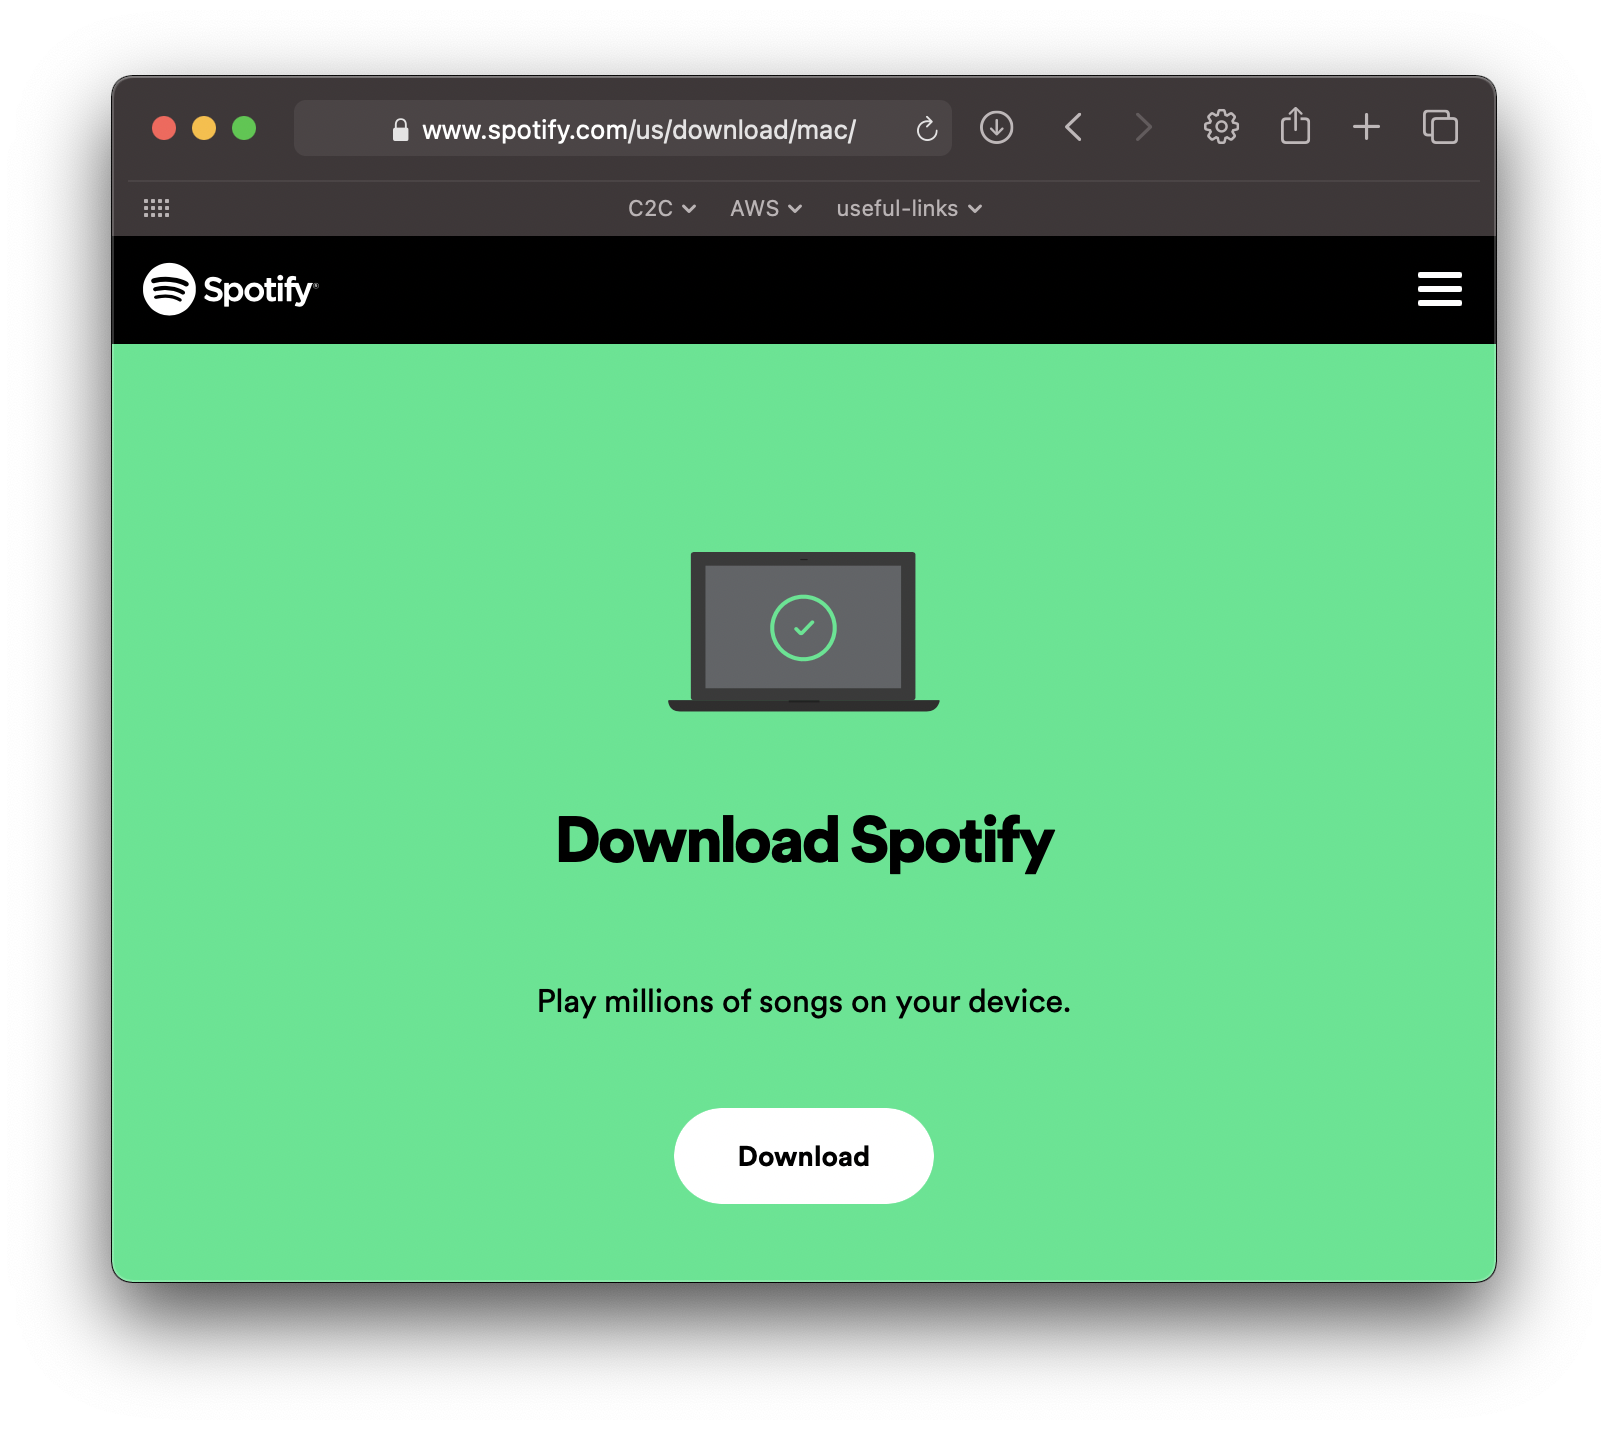 can i get spotify on my macbook